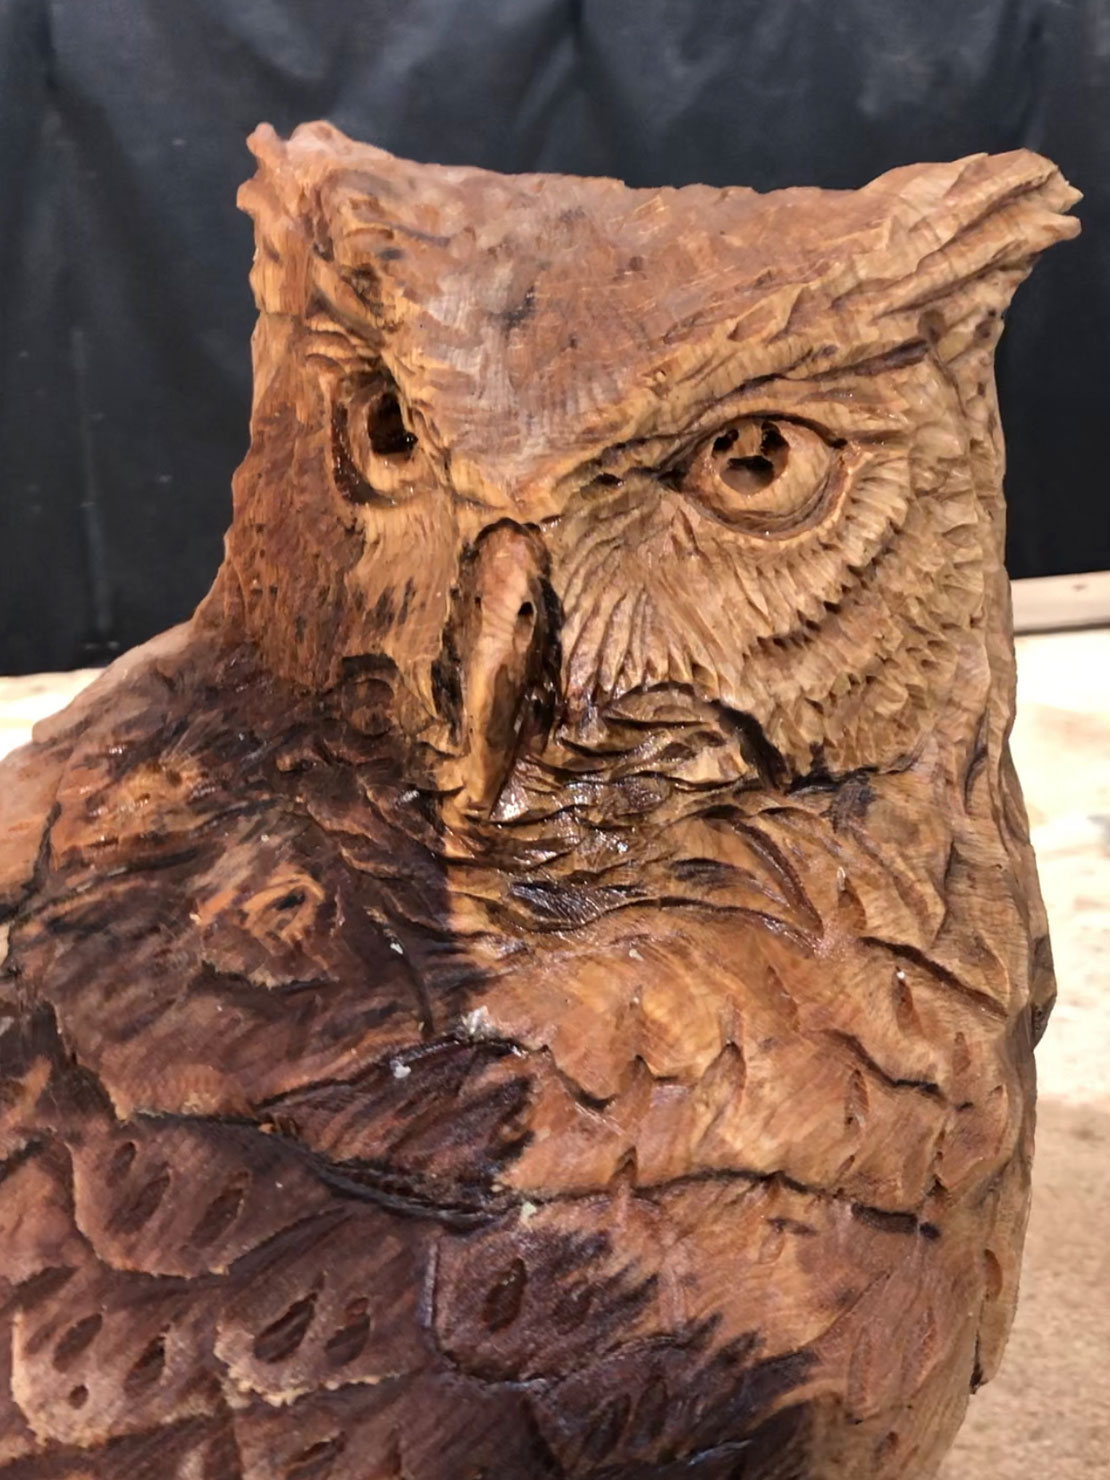 Wooden owl carving